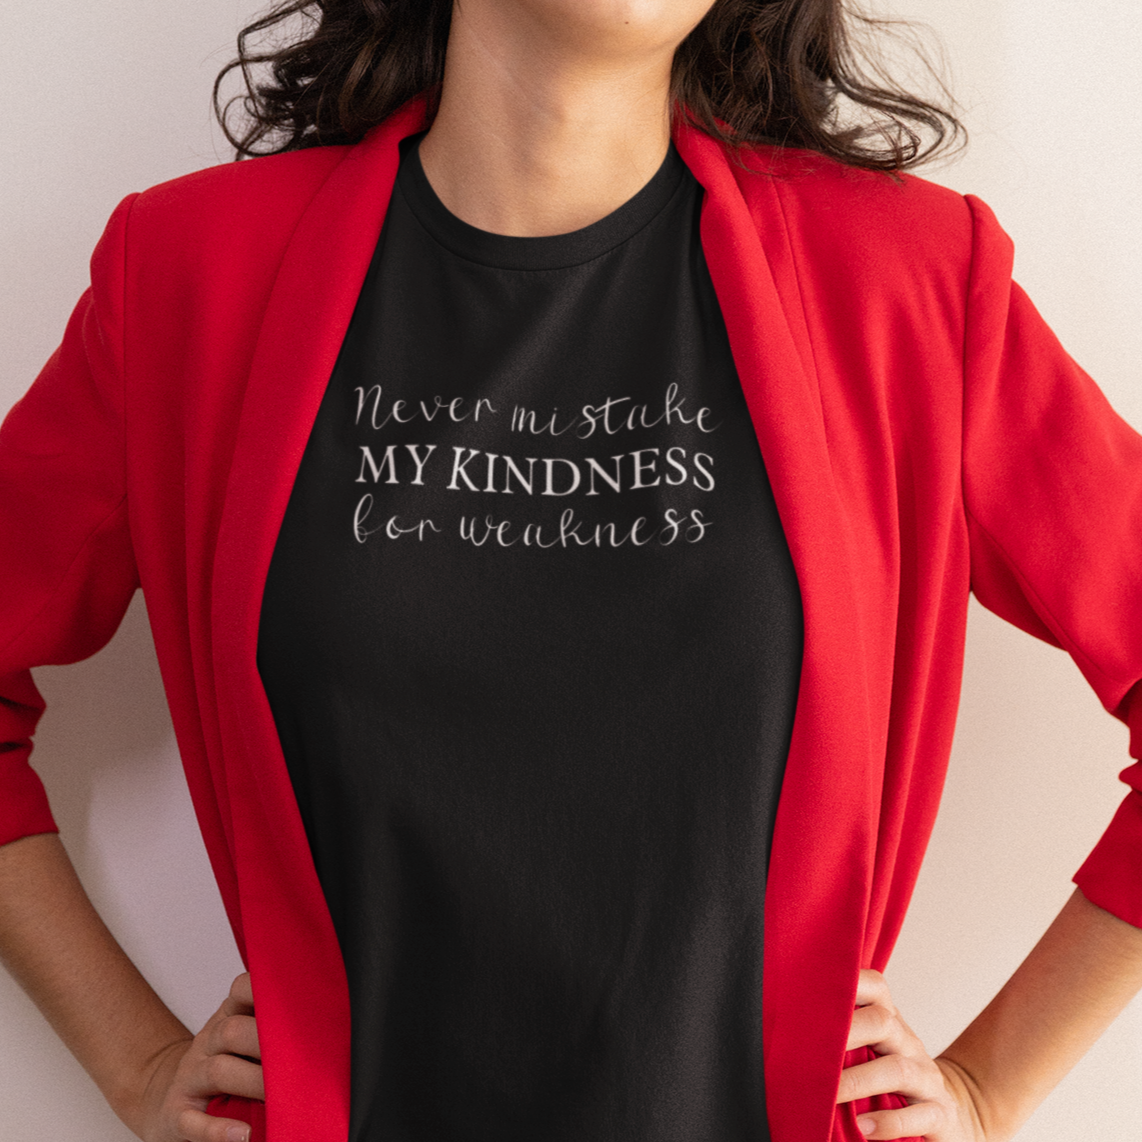 never-mistake-my-kindness-for-weakness-bella-canvas-t-shirt-mockup-of-a-woman-wearing-a-red-blazer